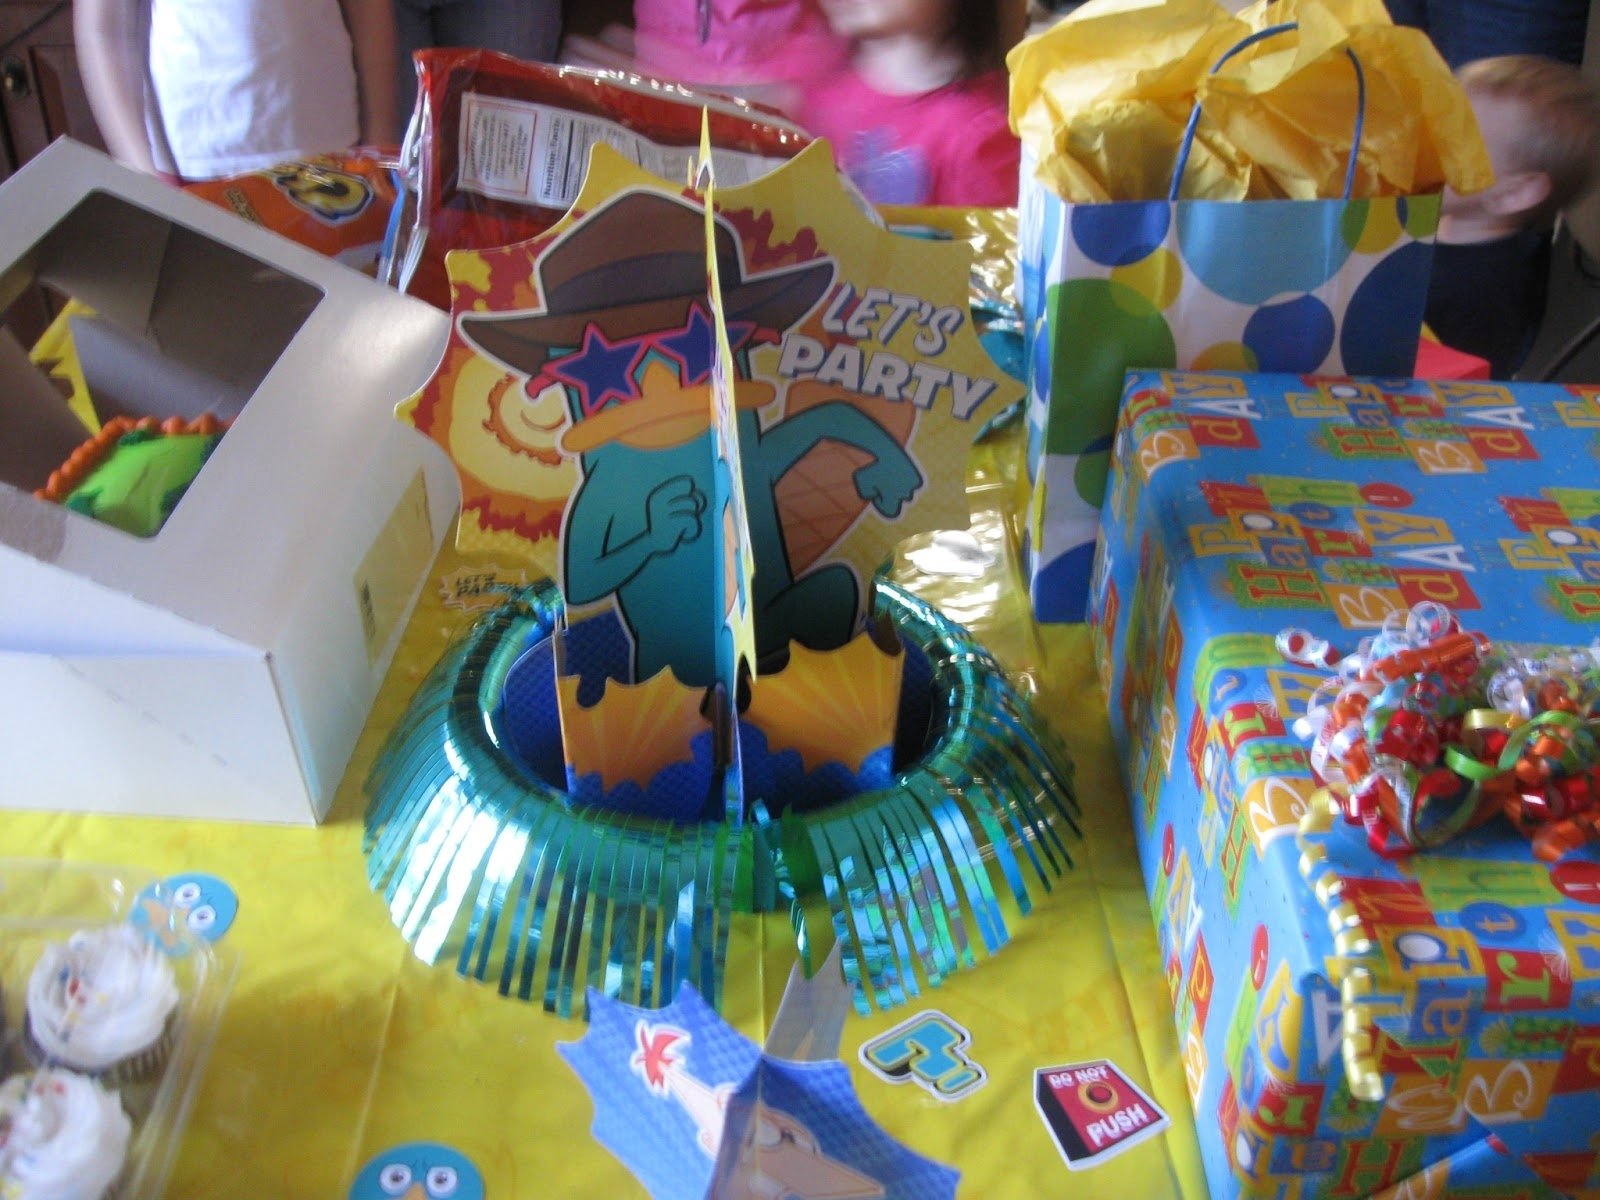 10 Elegant Phineas And Ferb Birthday Party Ideas taste and see gods goodness phineas and ferb birthday party 1 2022